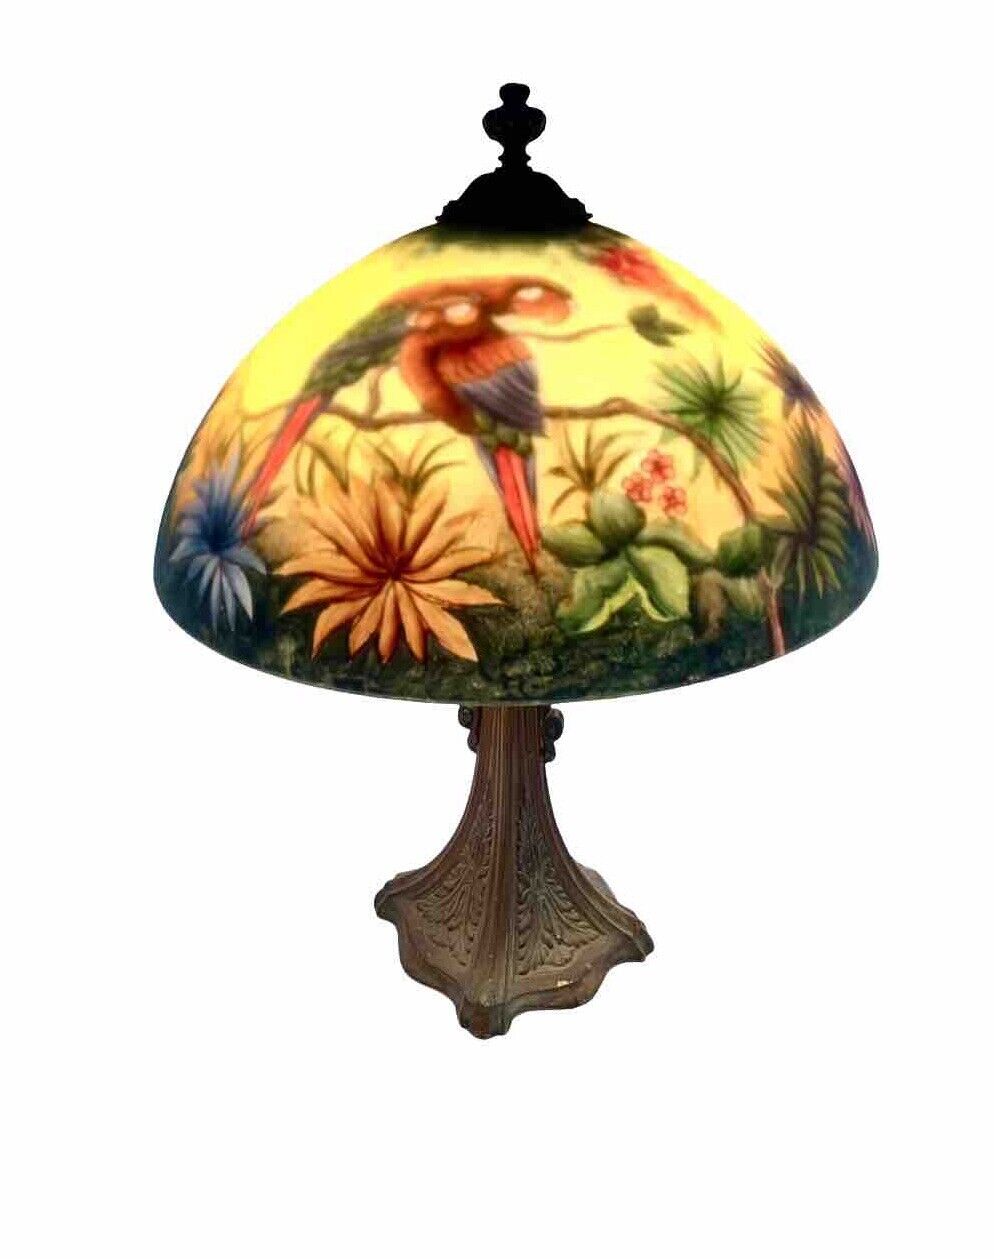 Antique Lamp Reverse Painted Parrot Macaw Bird Glass Handel Design Tiffany Style